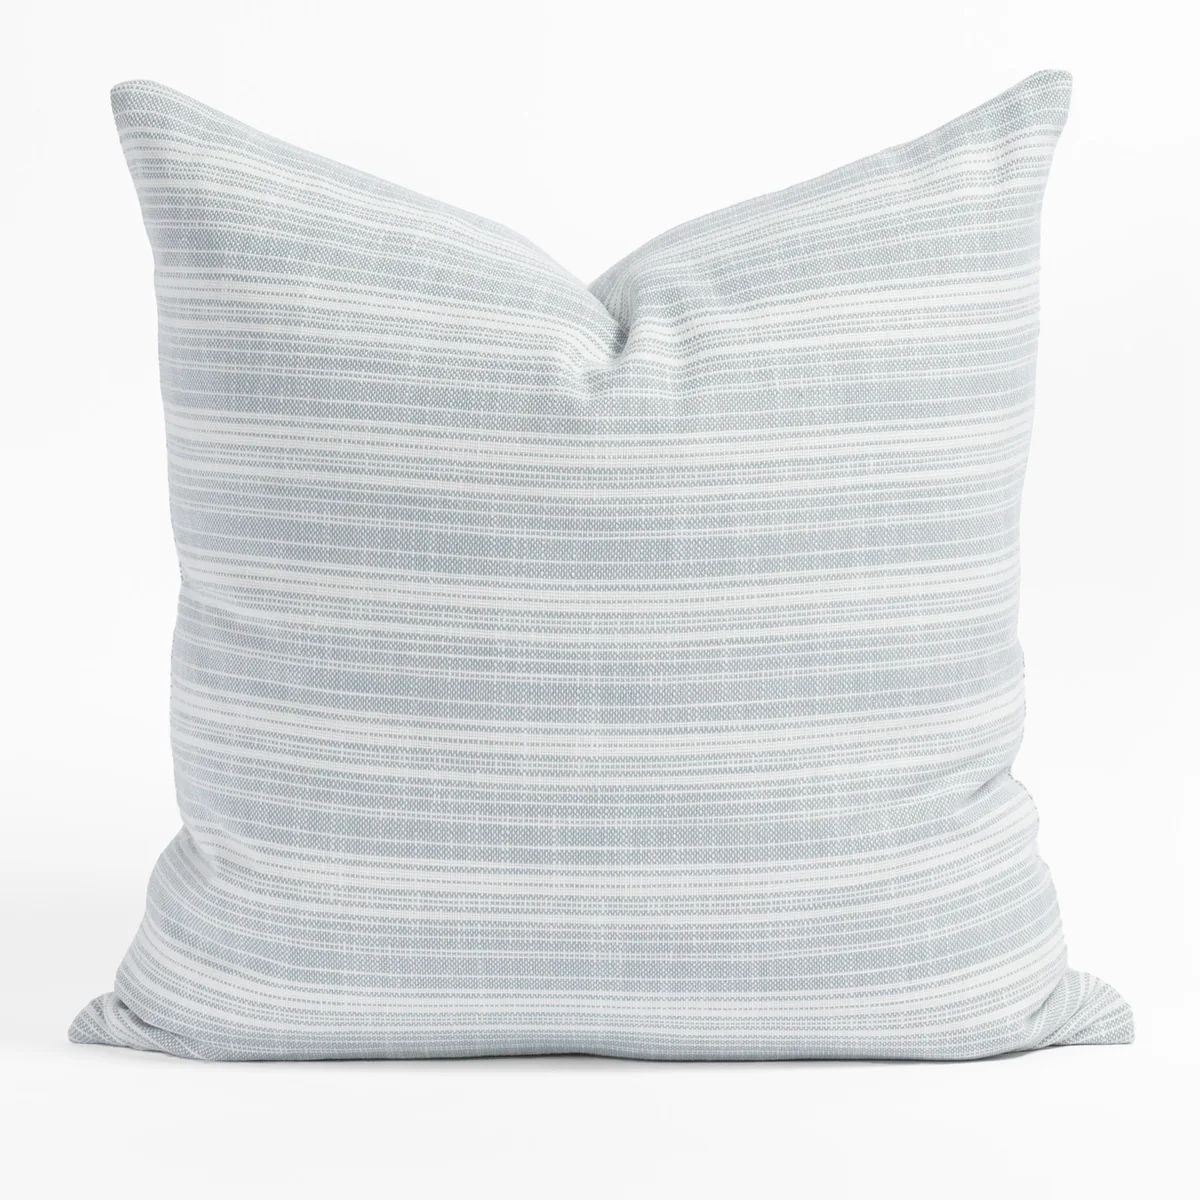 Trouville 22x22 Indoor/Outdoor Pillow, Sky Blue | Tonic Living